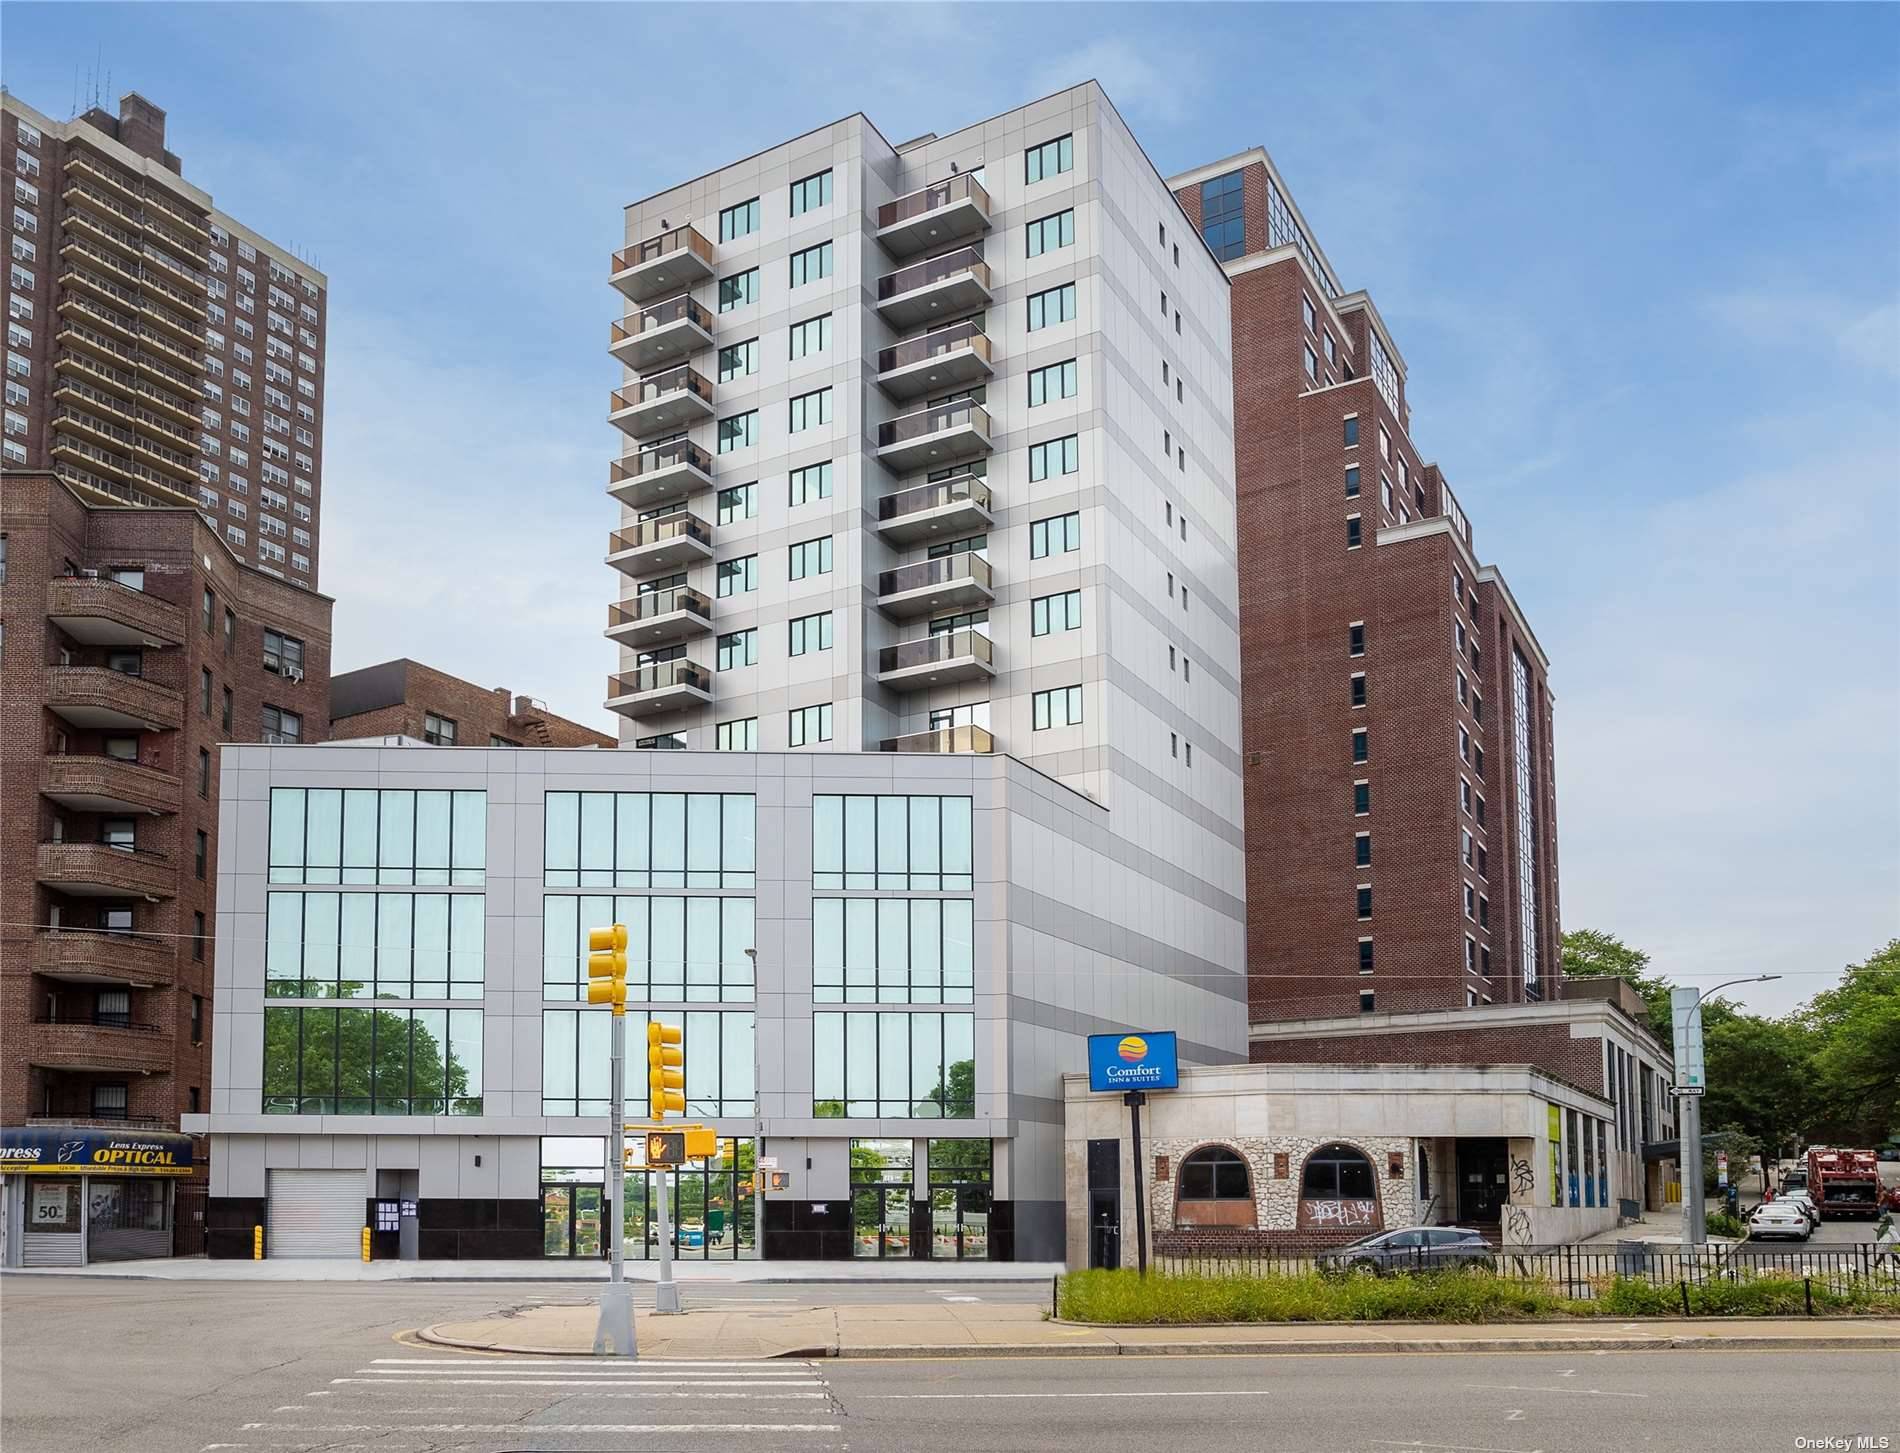 Welcome to Kew Gardens Tower, a brand new modern condominium building.